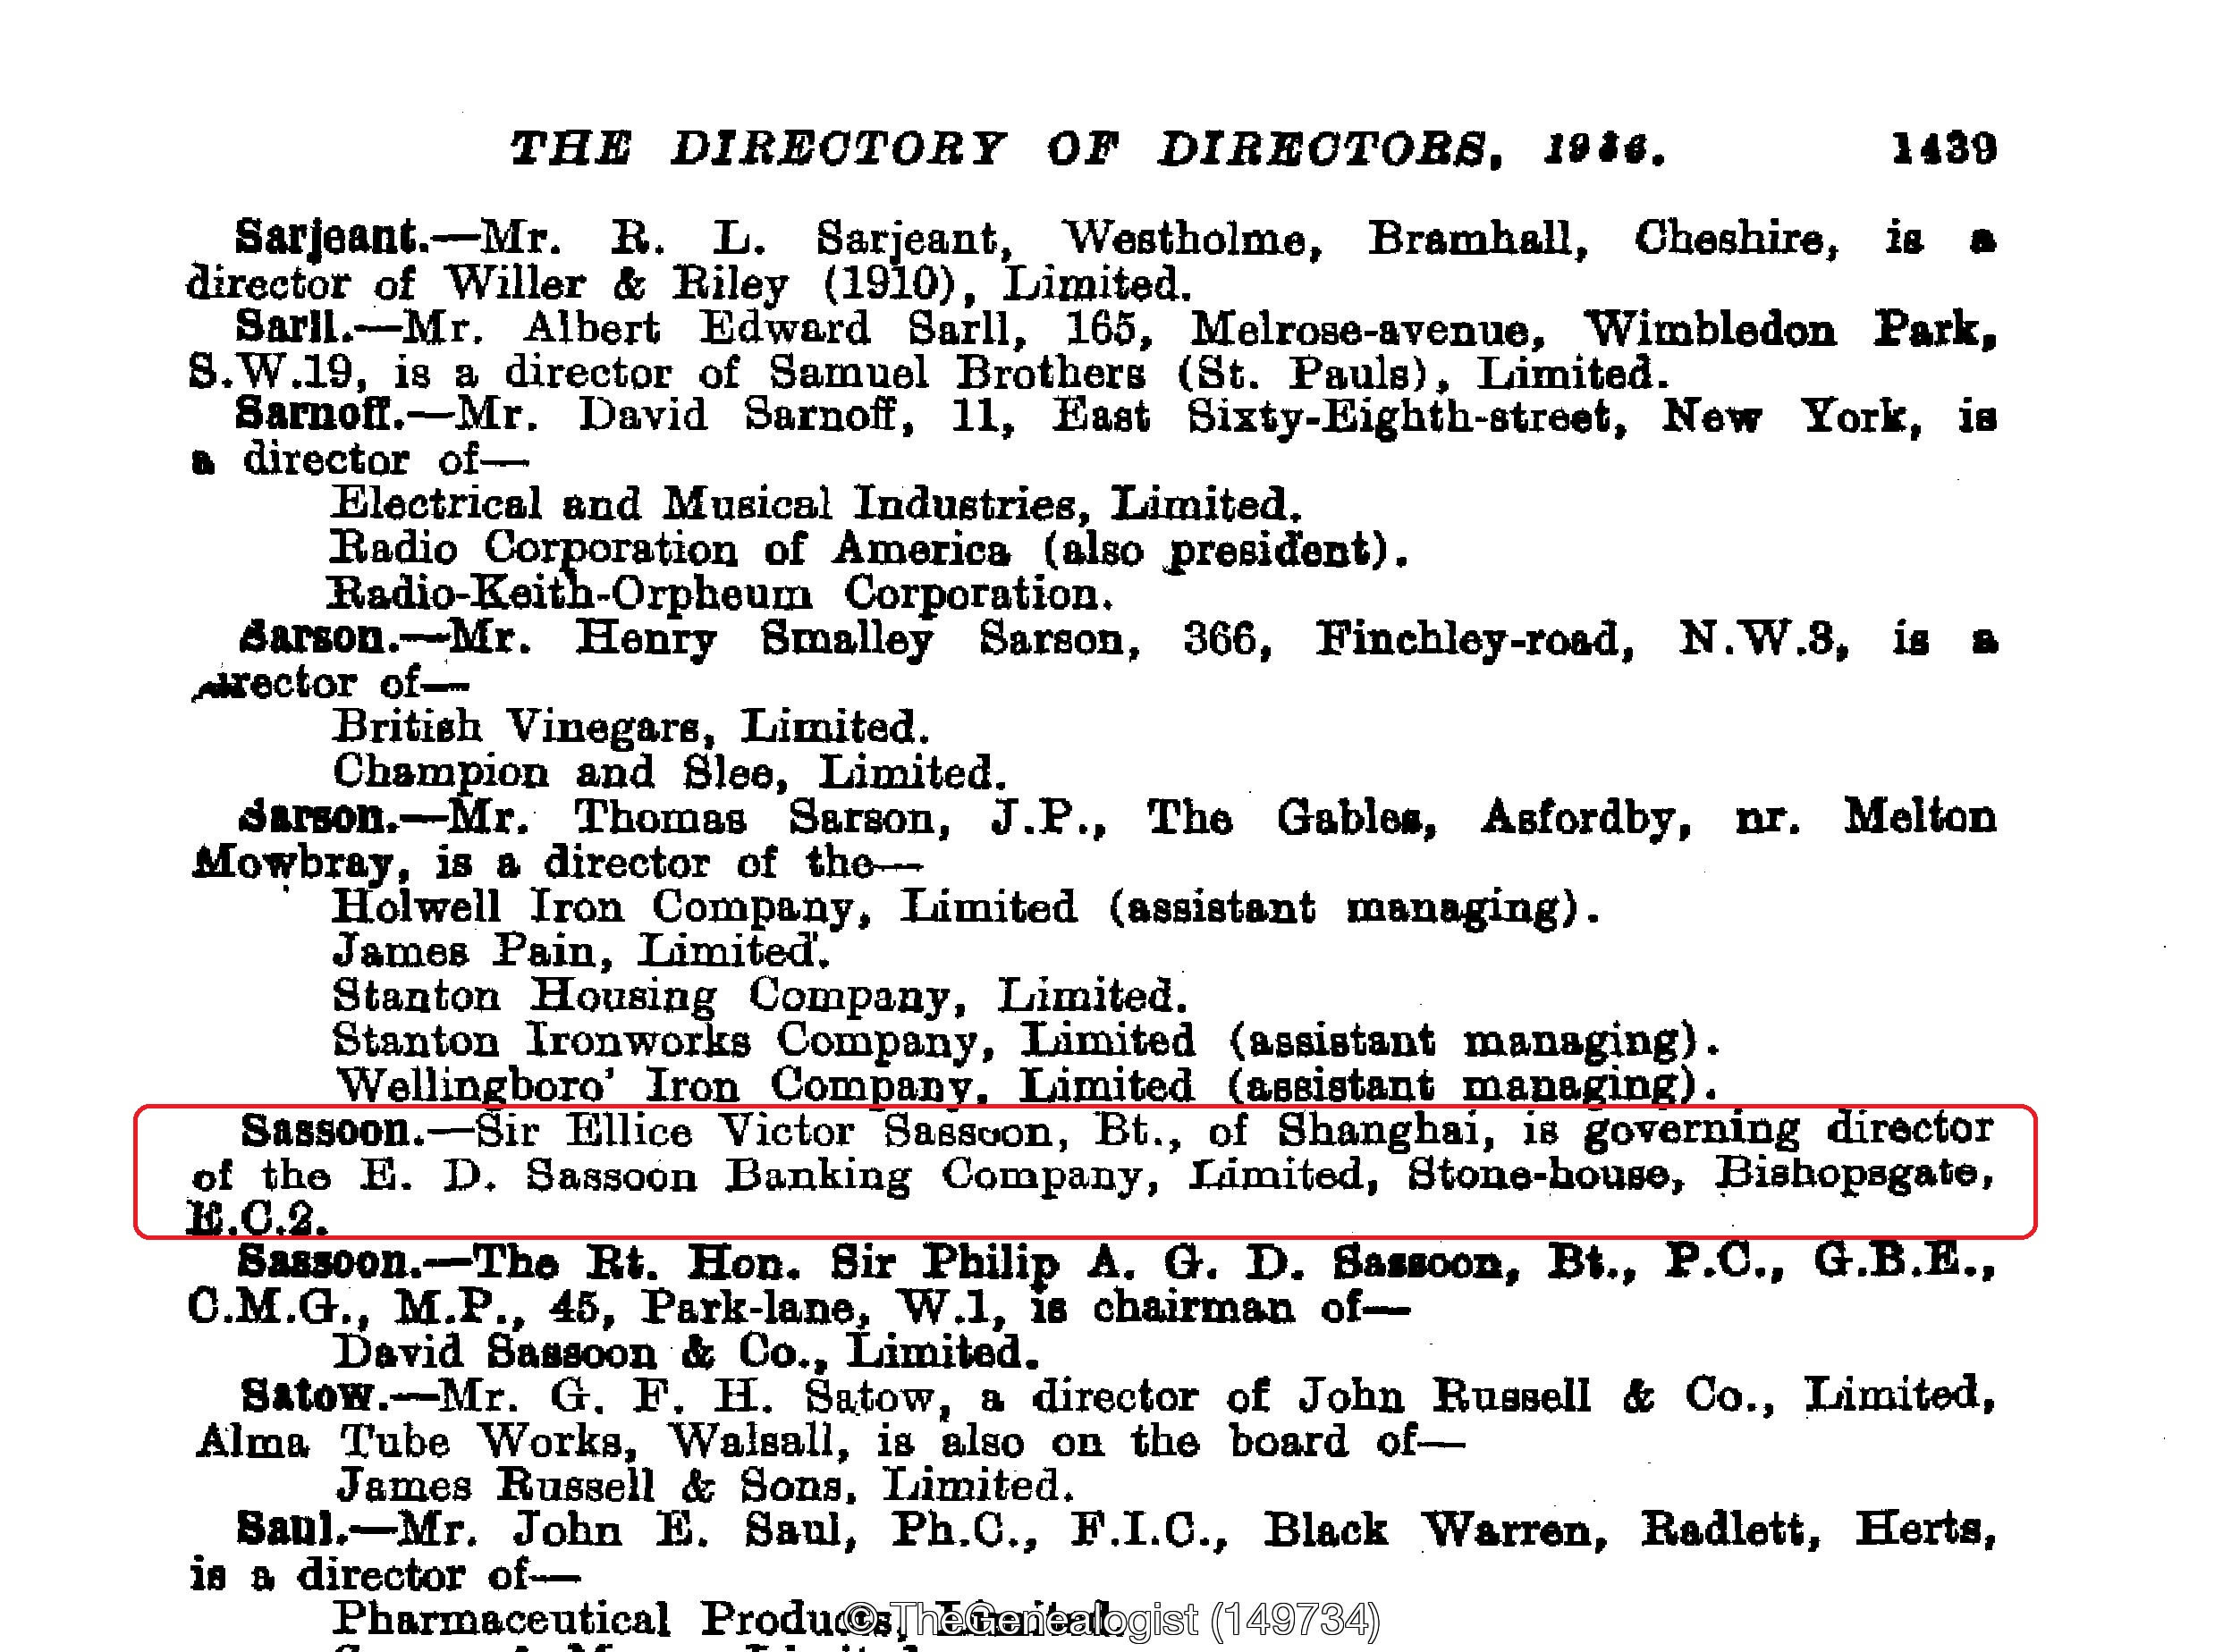 The Directory of Directors 1936 from TheGenealogist's Occupational Records